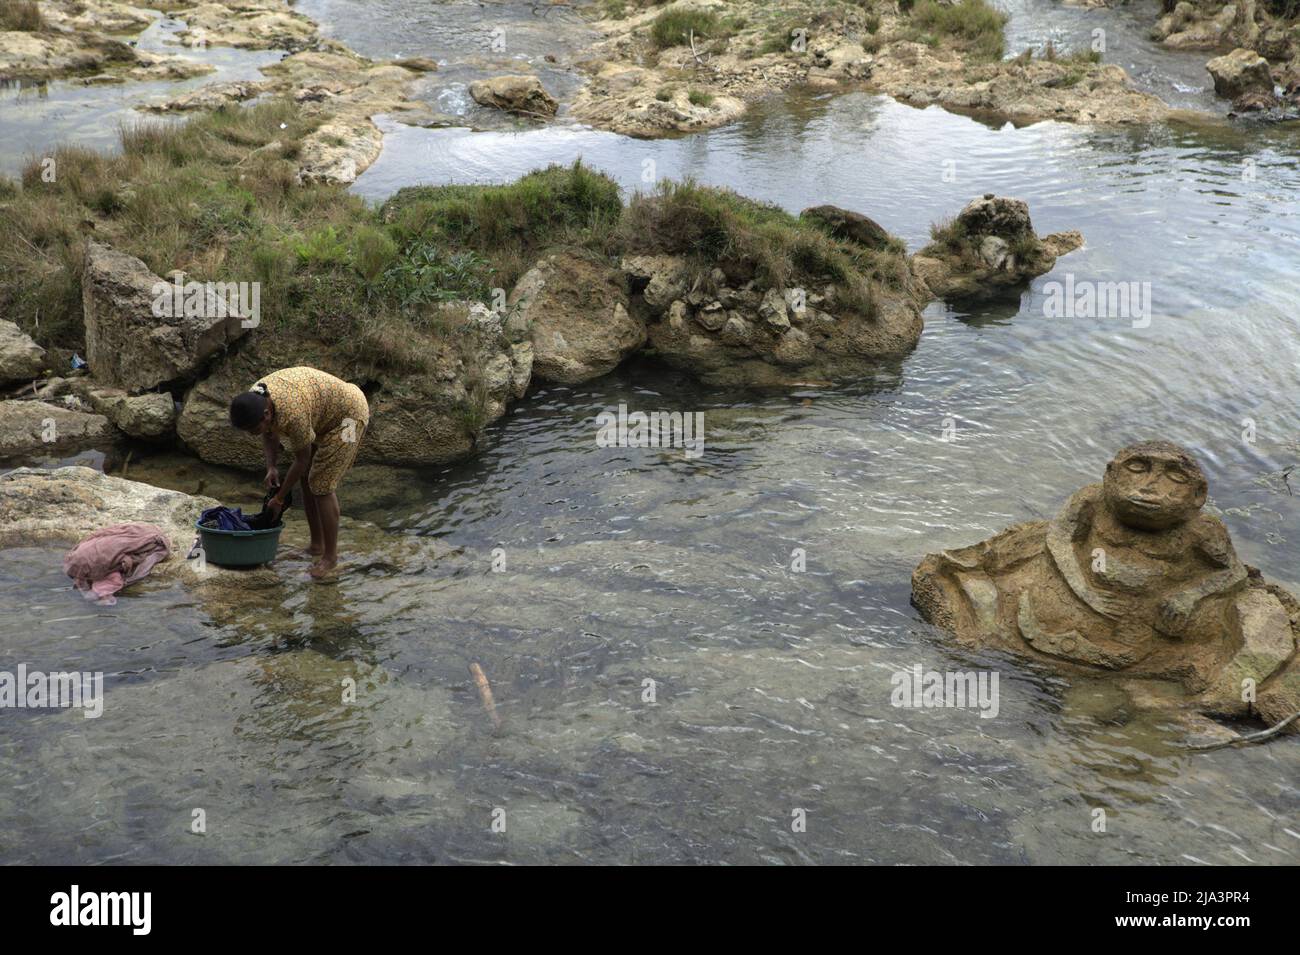 A woman washing clothes on a stream close to a carved stone of human figure near Waikelo Sawah, a rare water source in Sumba—an island regularly hit by drought, which is located in Tema Tana village, East Wewewa, Southwest Sumba, East Nusa Tenggara, Indonesia. Stock Photo